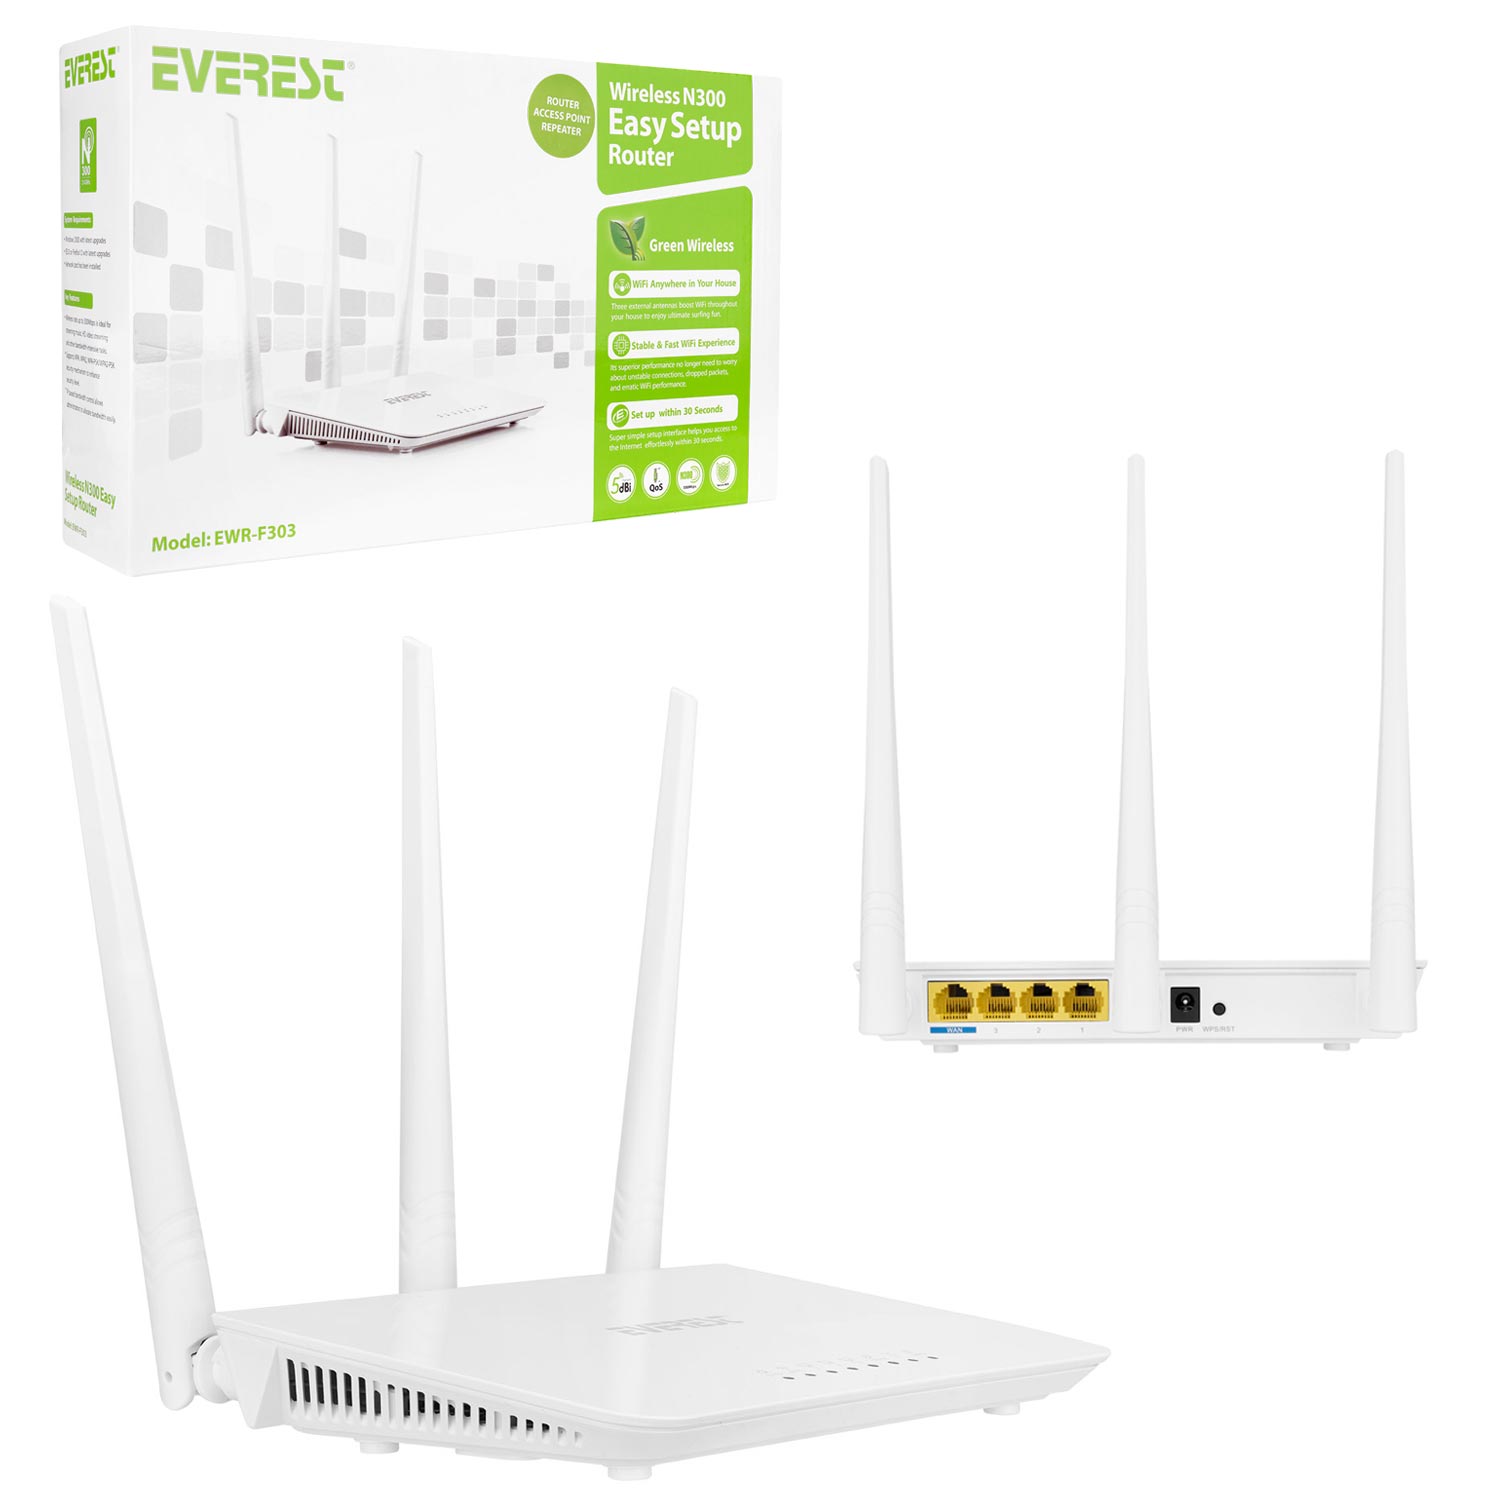 ACCESS POINT REPEATER ROUTER 4 PORT 300 MBPS EVEREST EWR-F303